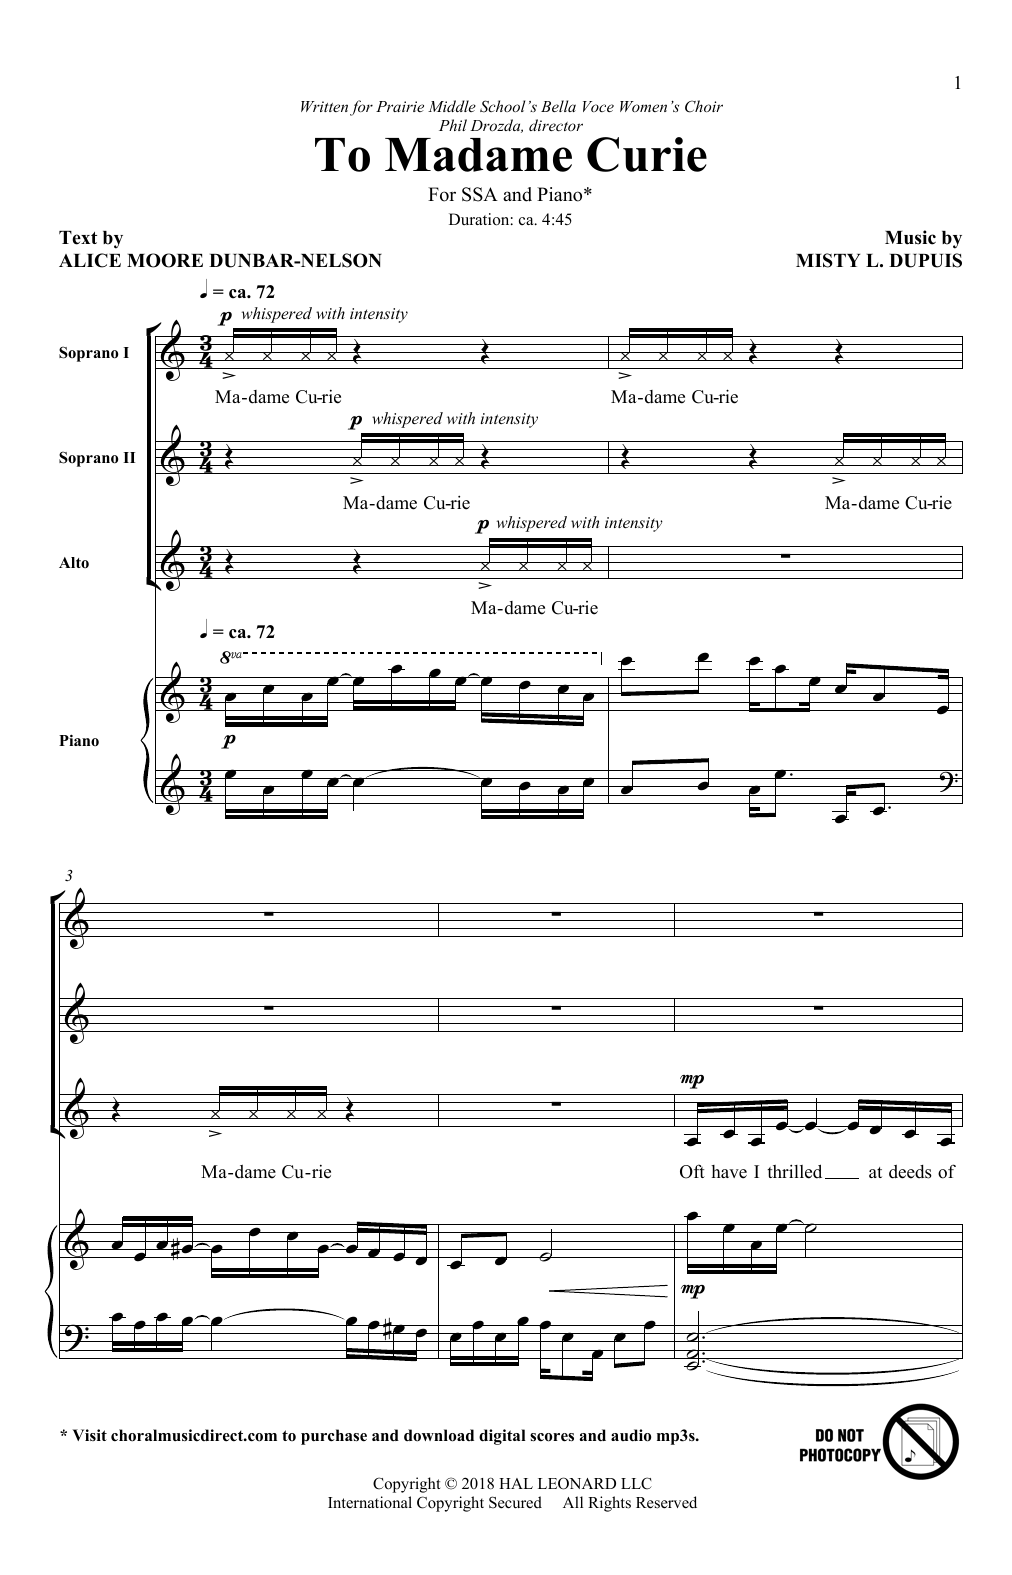 Download Misty L. Dupuis To Madame Curie Sheet Music